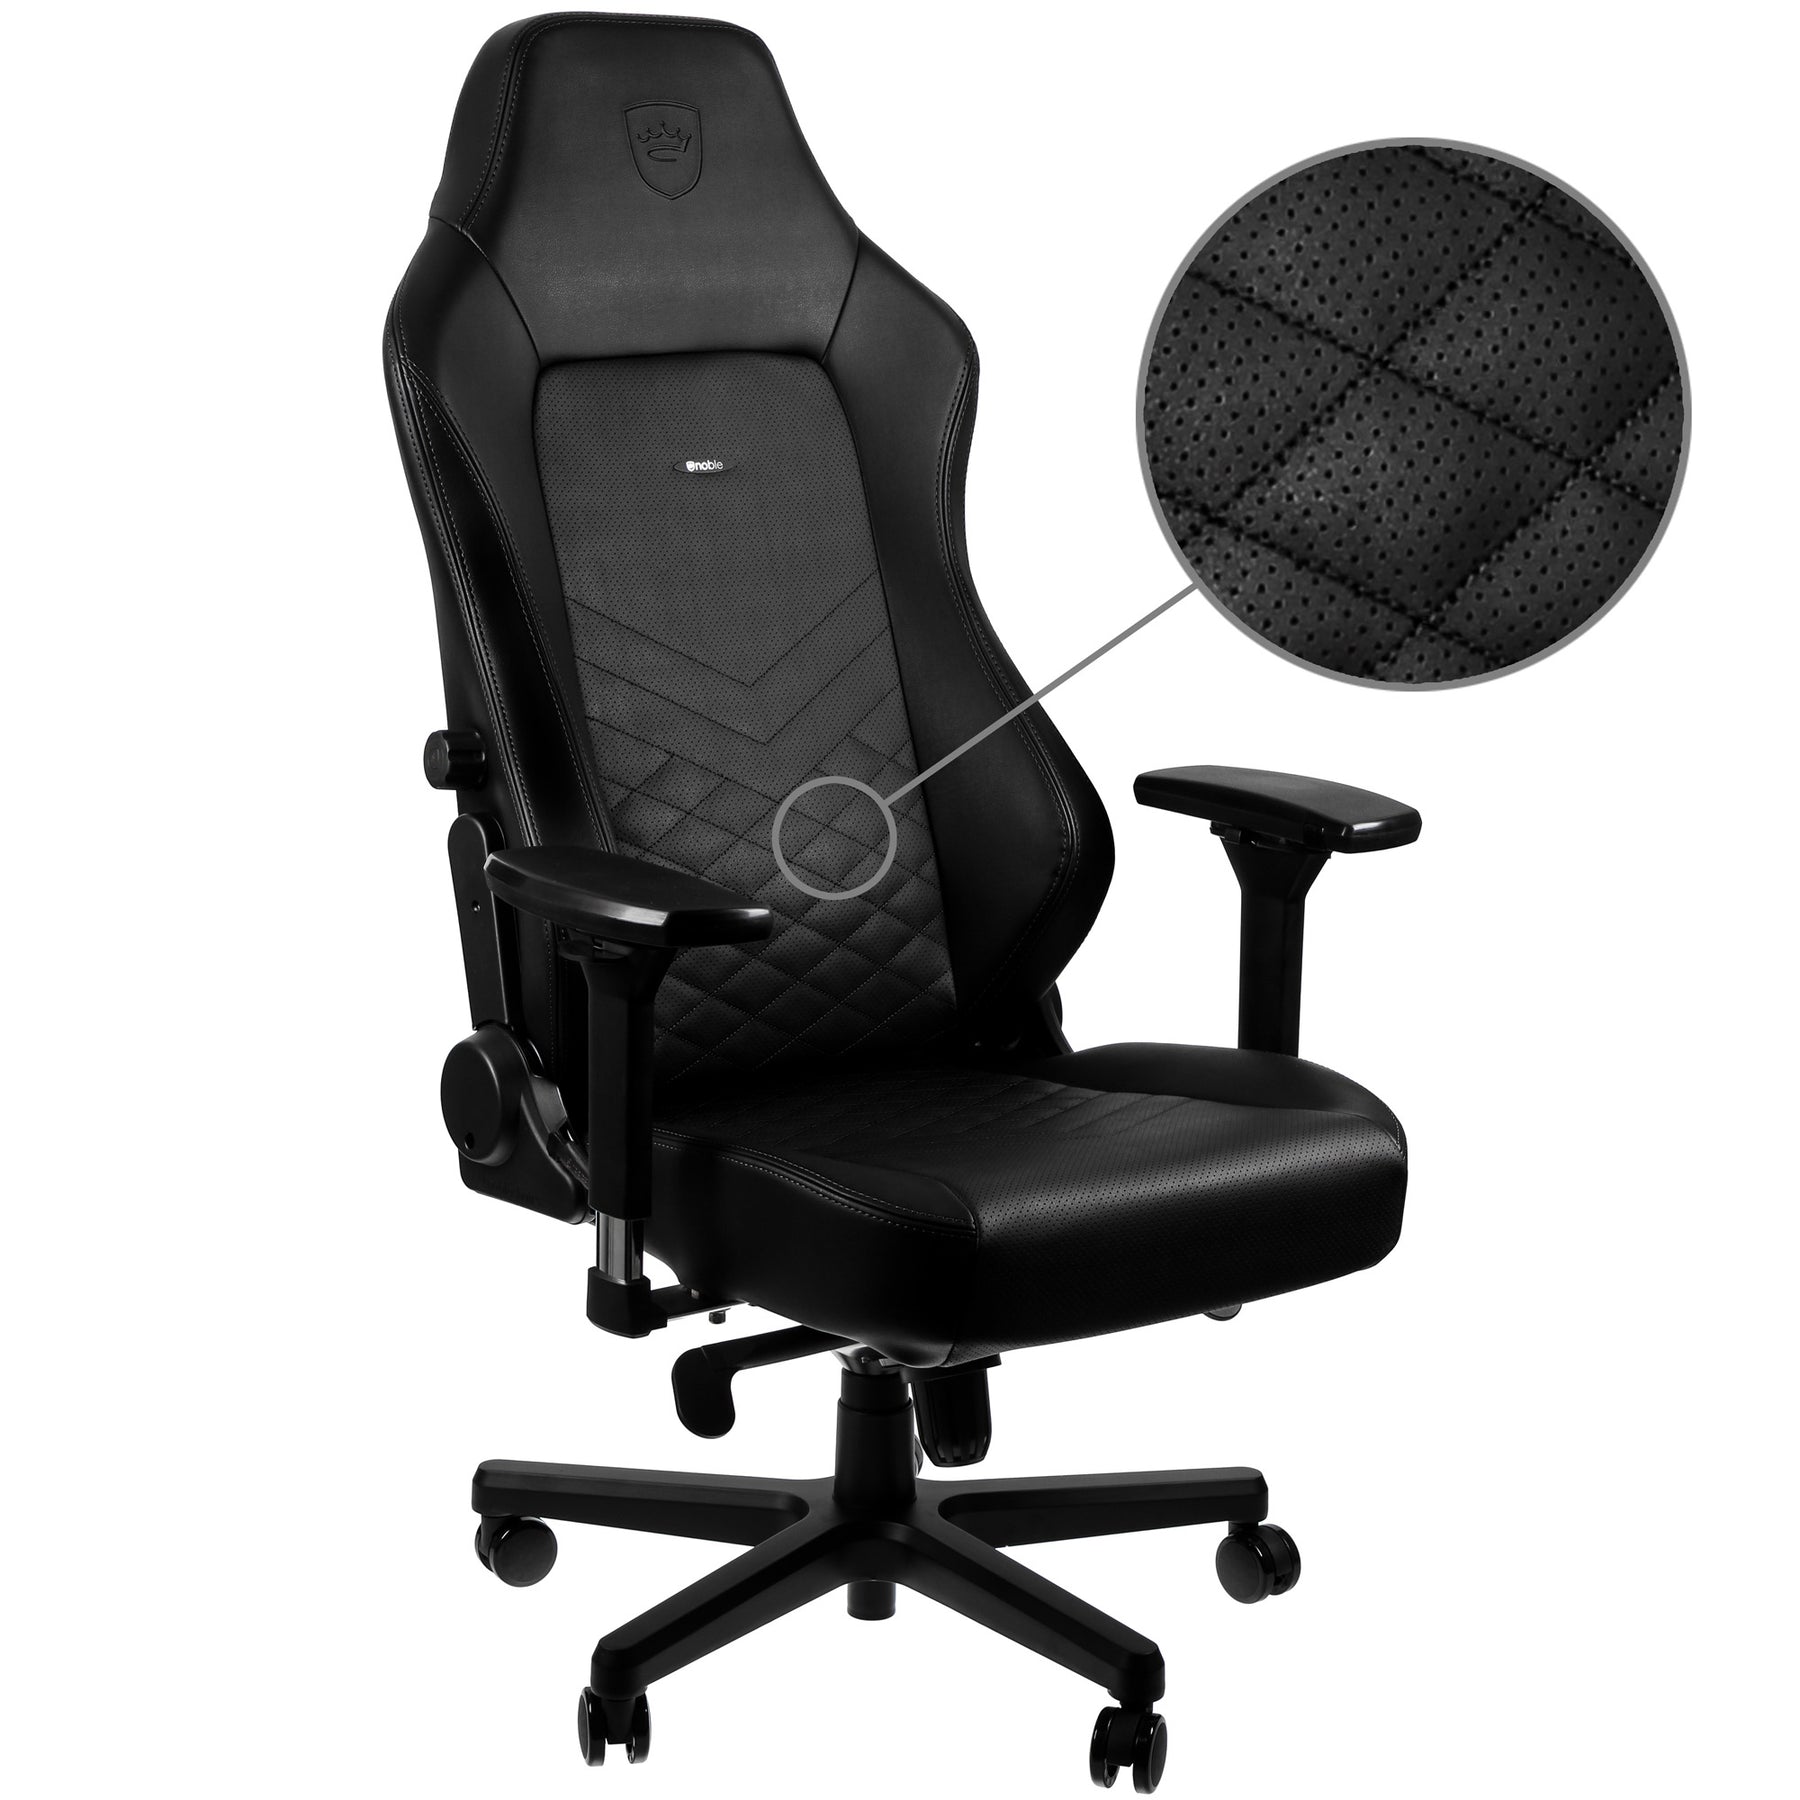 noblechairs Lumbar-Support Pillow, Gaming-Chair Cushion Set, Black/White